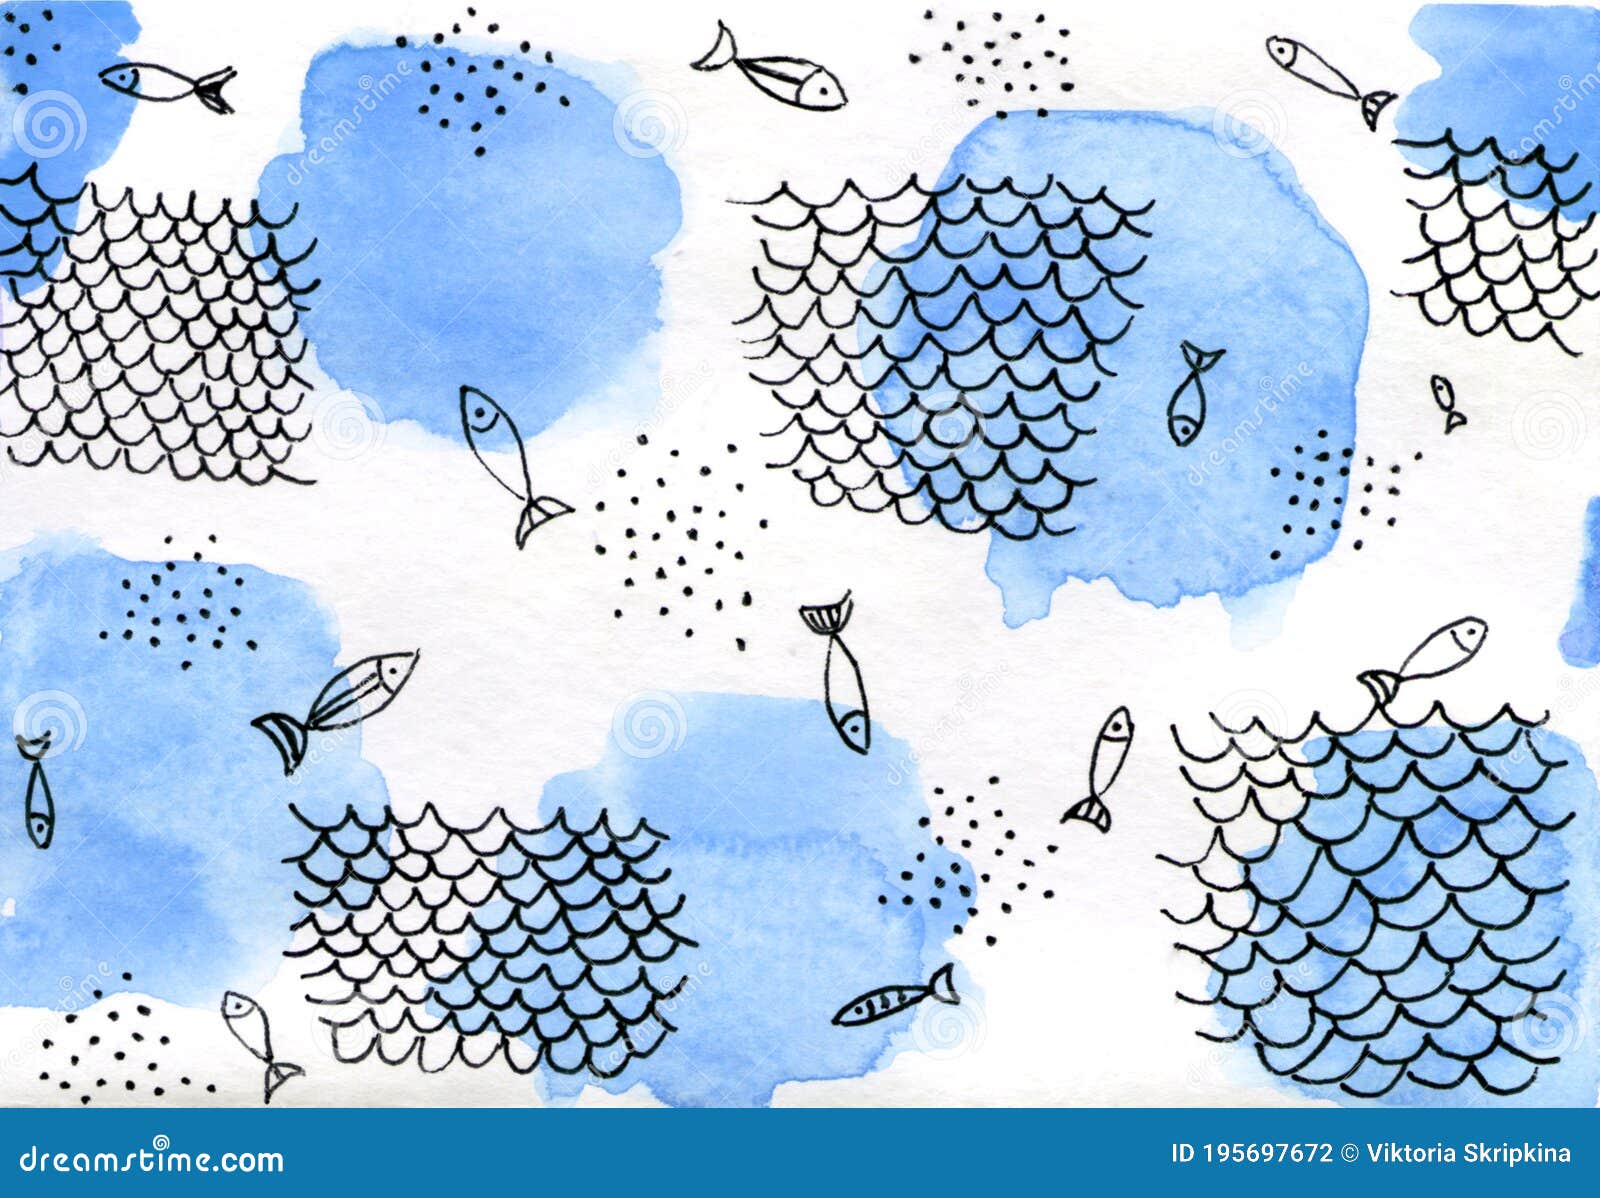 Blue Spots and Drawing by the Gel Pen Fishes and Fishing Net